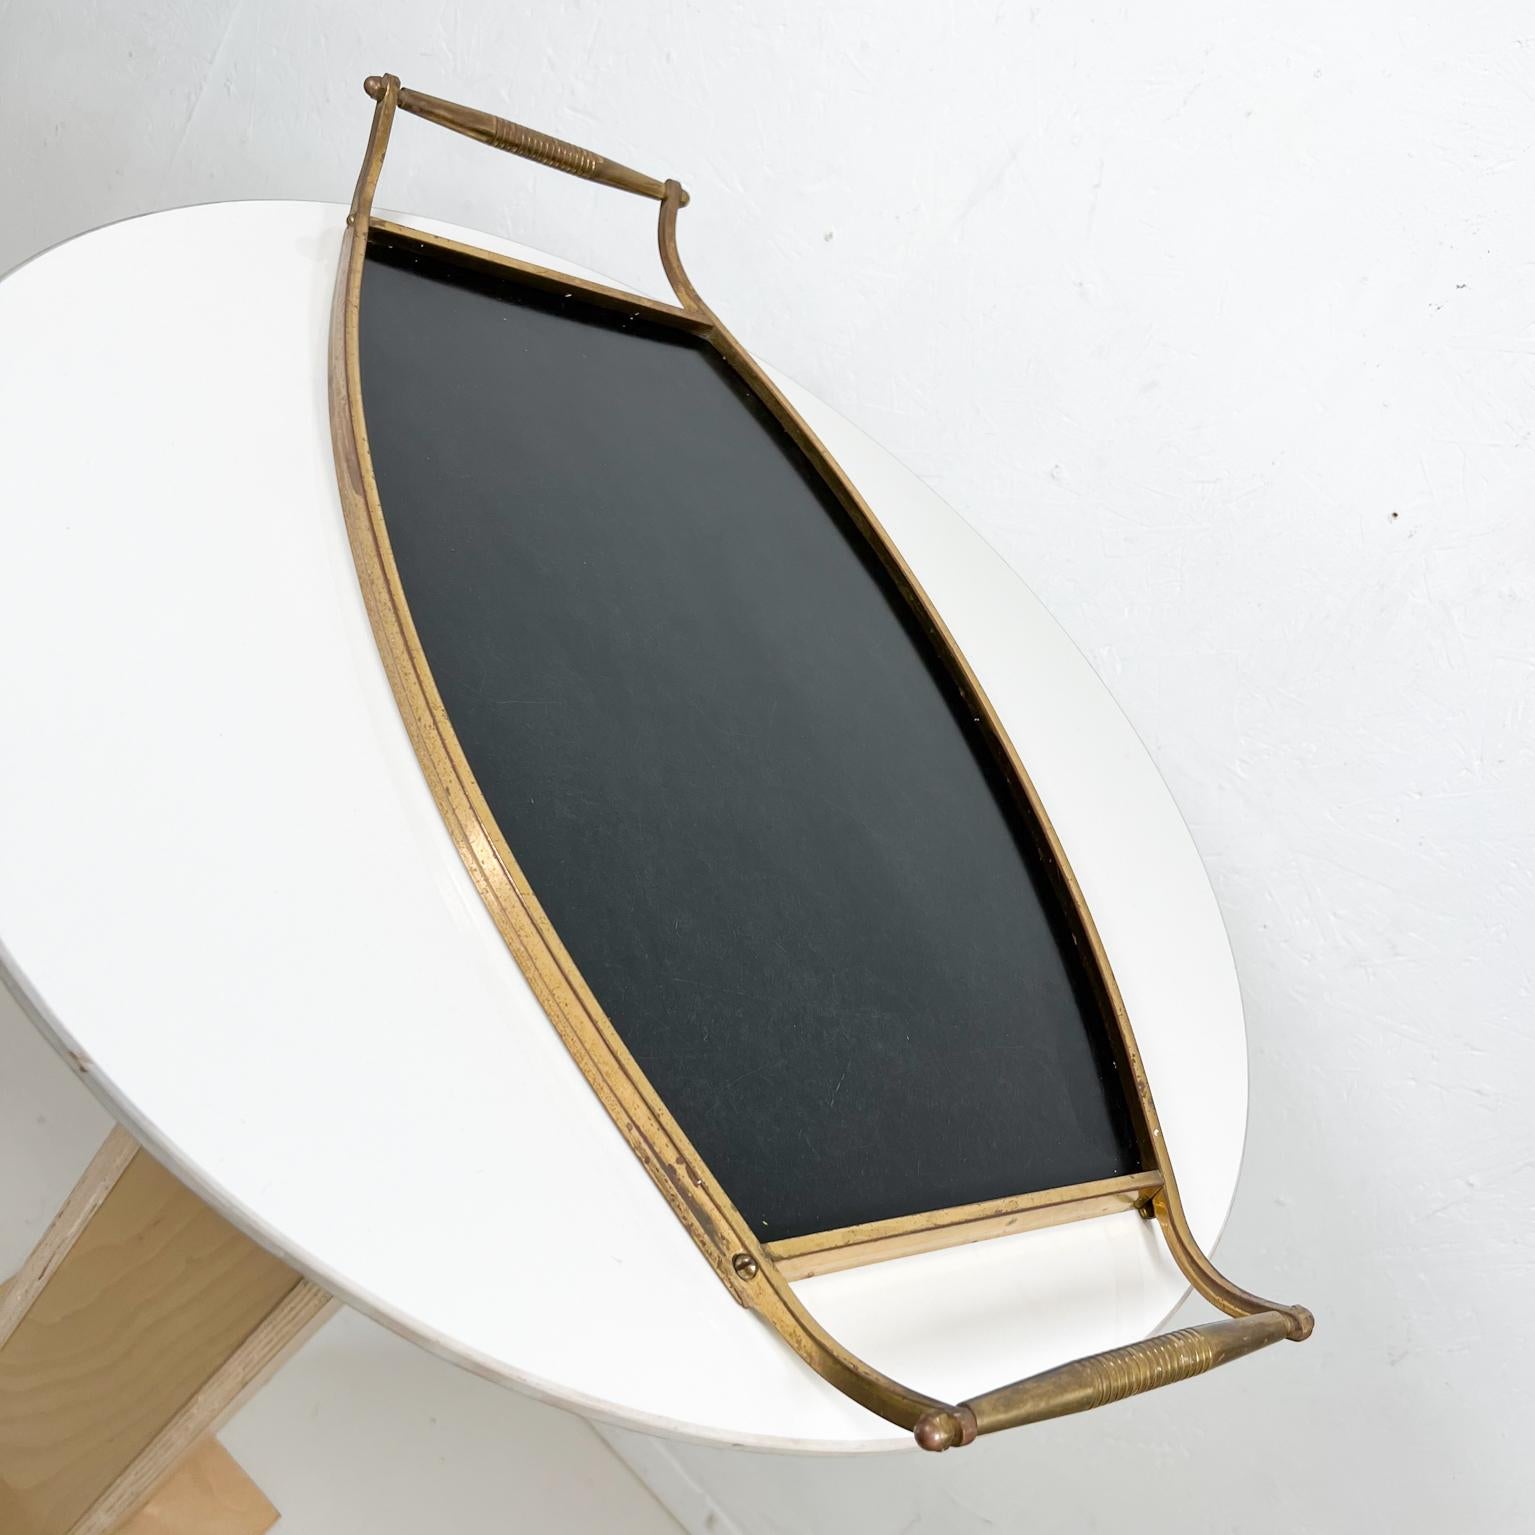 1940s Elegant black laminate on brass service tray with handles.
Measures: 24.5 W x 11.75 D x 2.
Preowned original unrestored vintage condition.
See images provided please.


